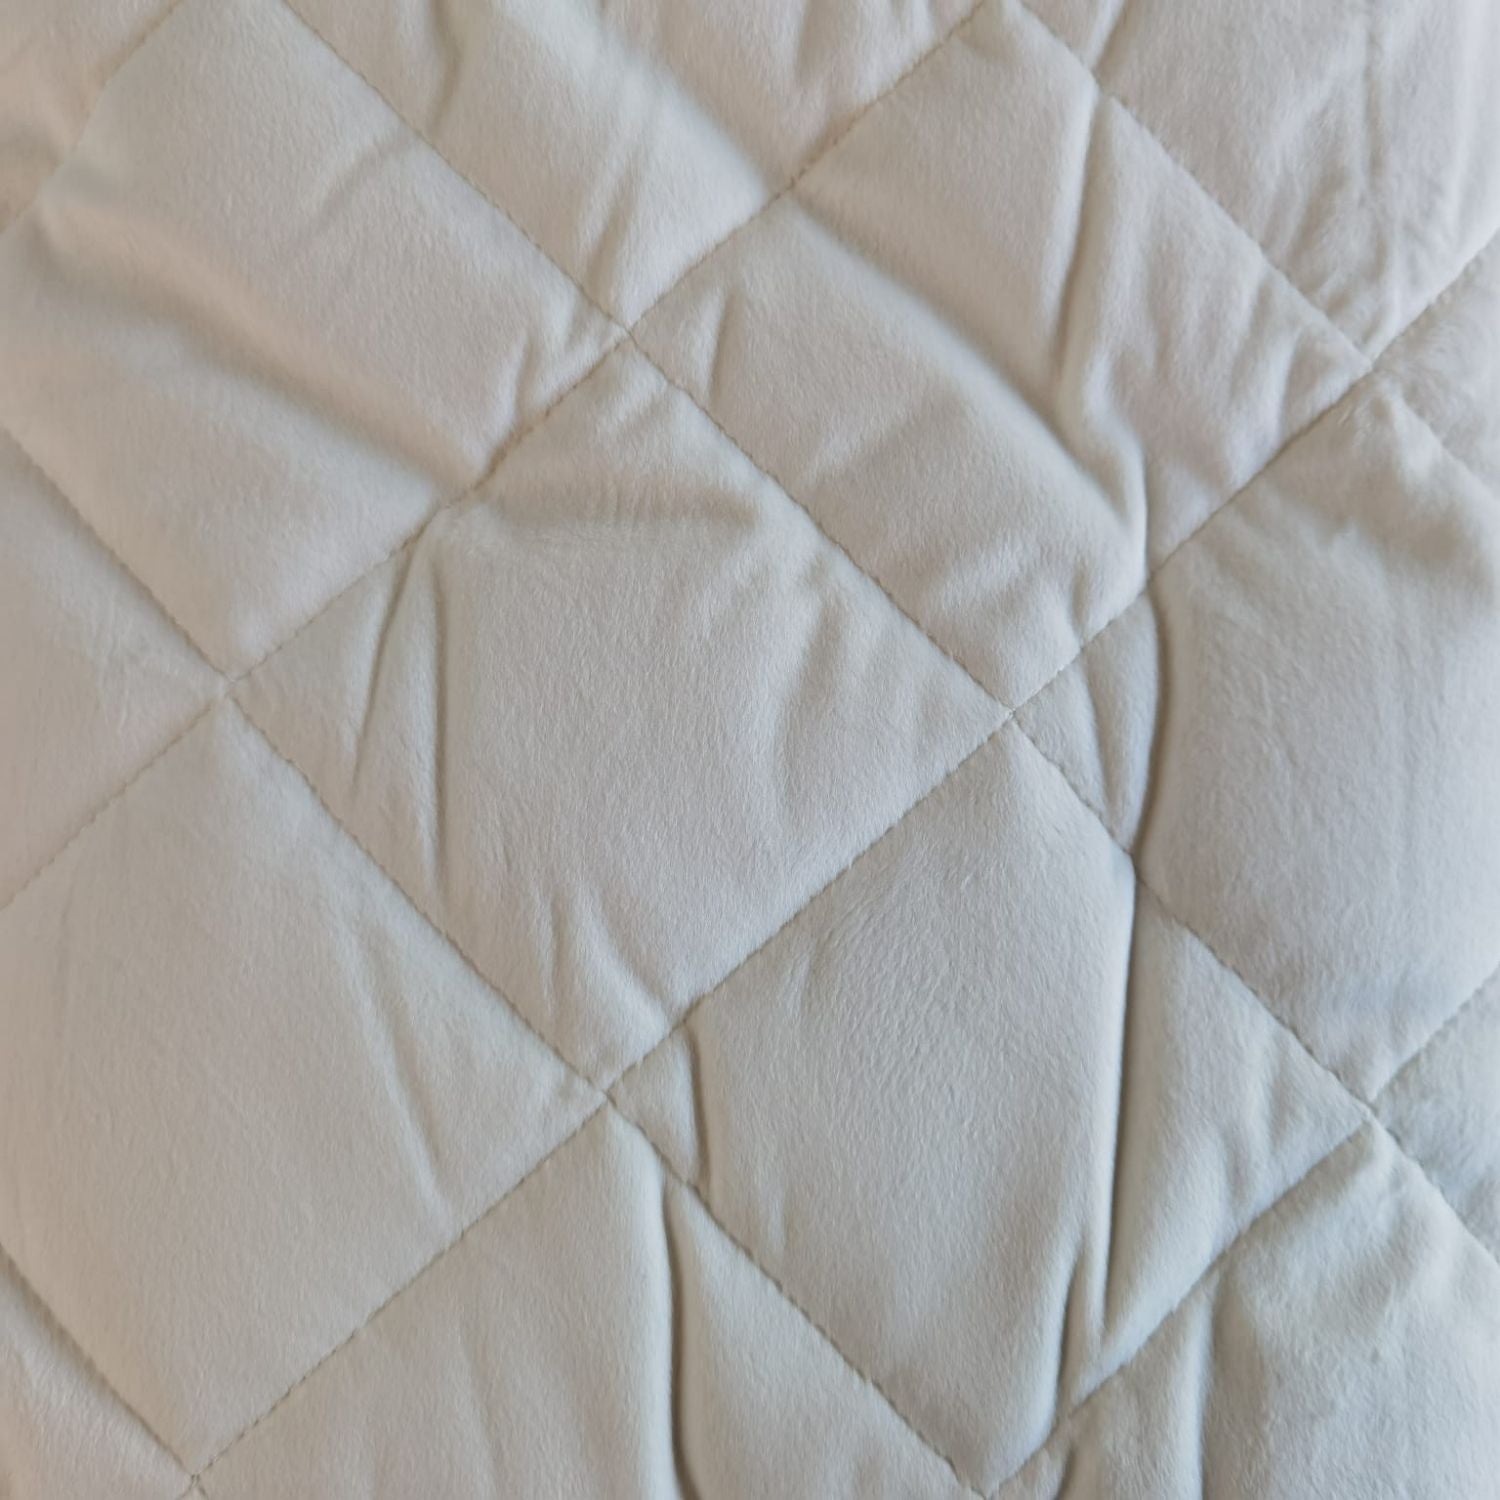 The Home Bedroom Fleece Mattress Protector - White - Double Size 3 Shaws Department Stores